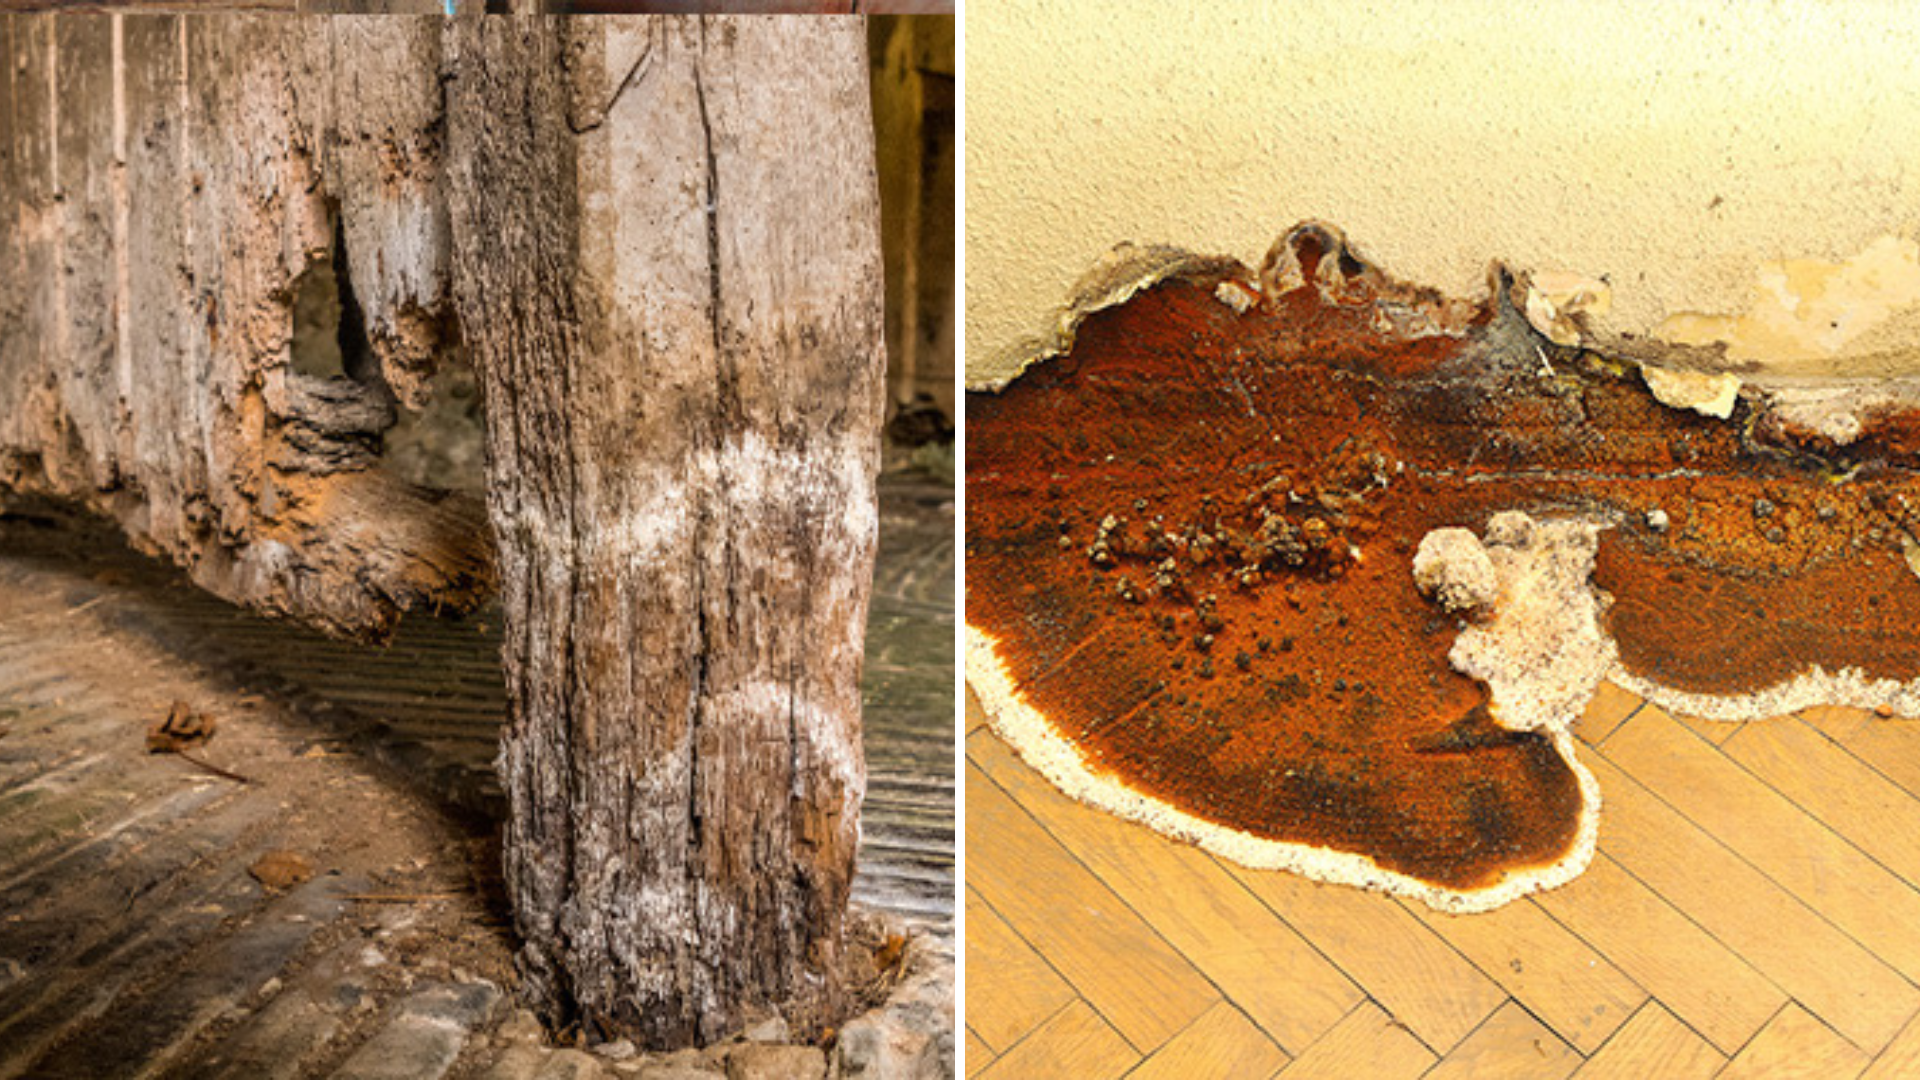 Photos of wet rot and dry rot next to each other. Wet rot shows white powdery lines, and dry rot shows a flat fungal growth, orange in colour